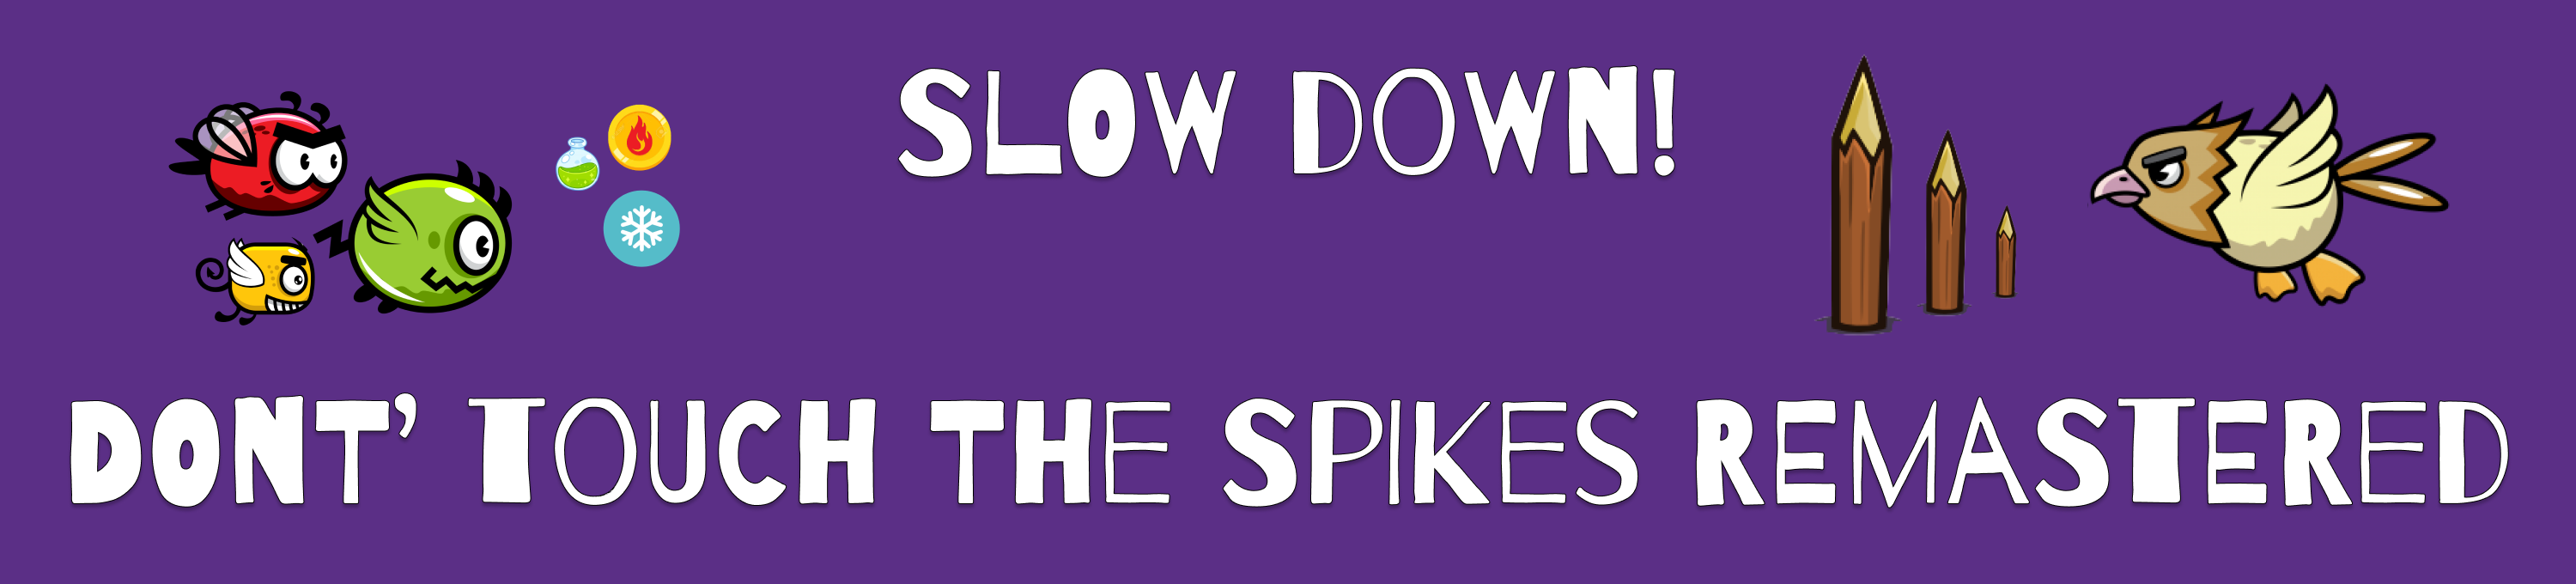 Slow down: Don't touch the spikes remastered